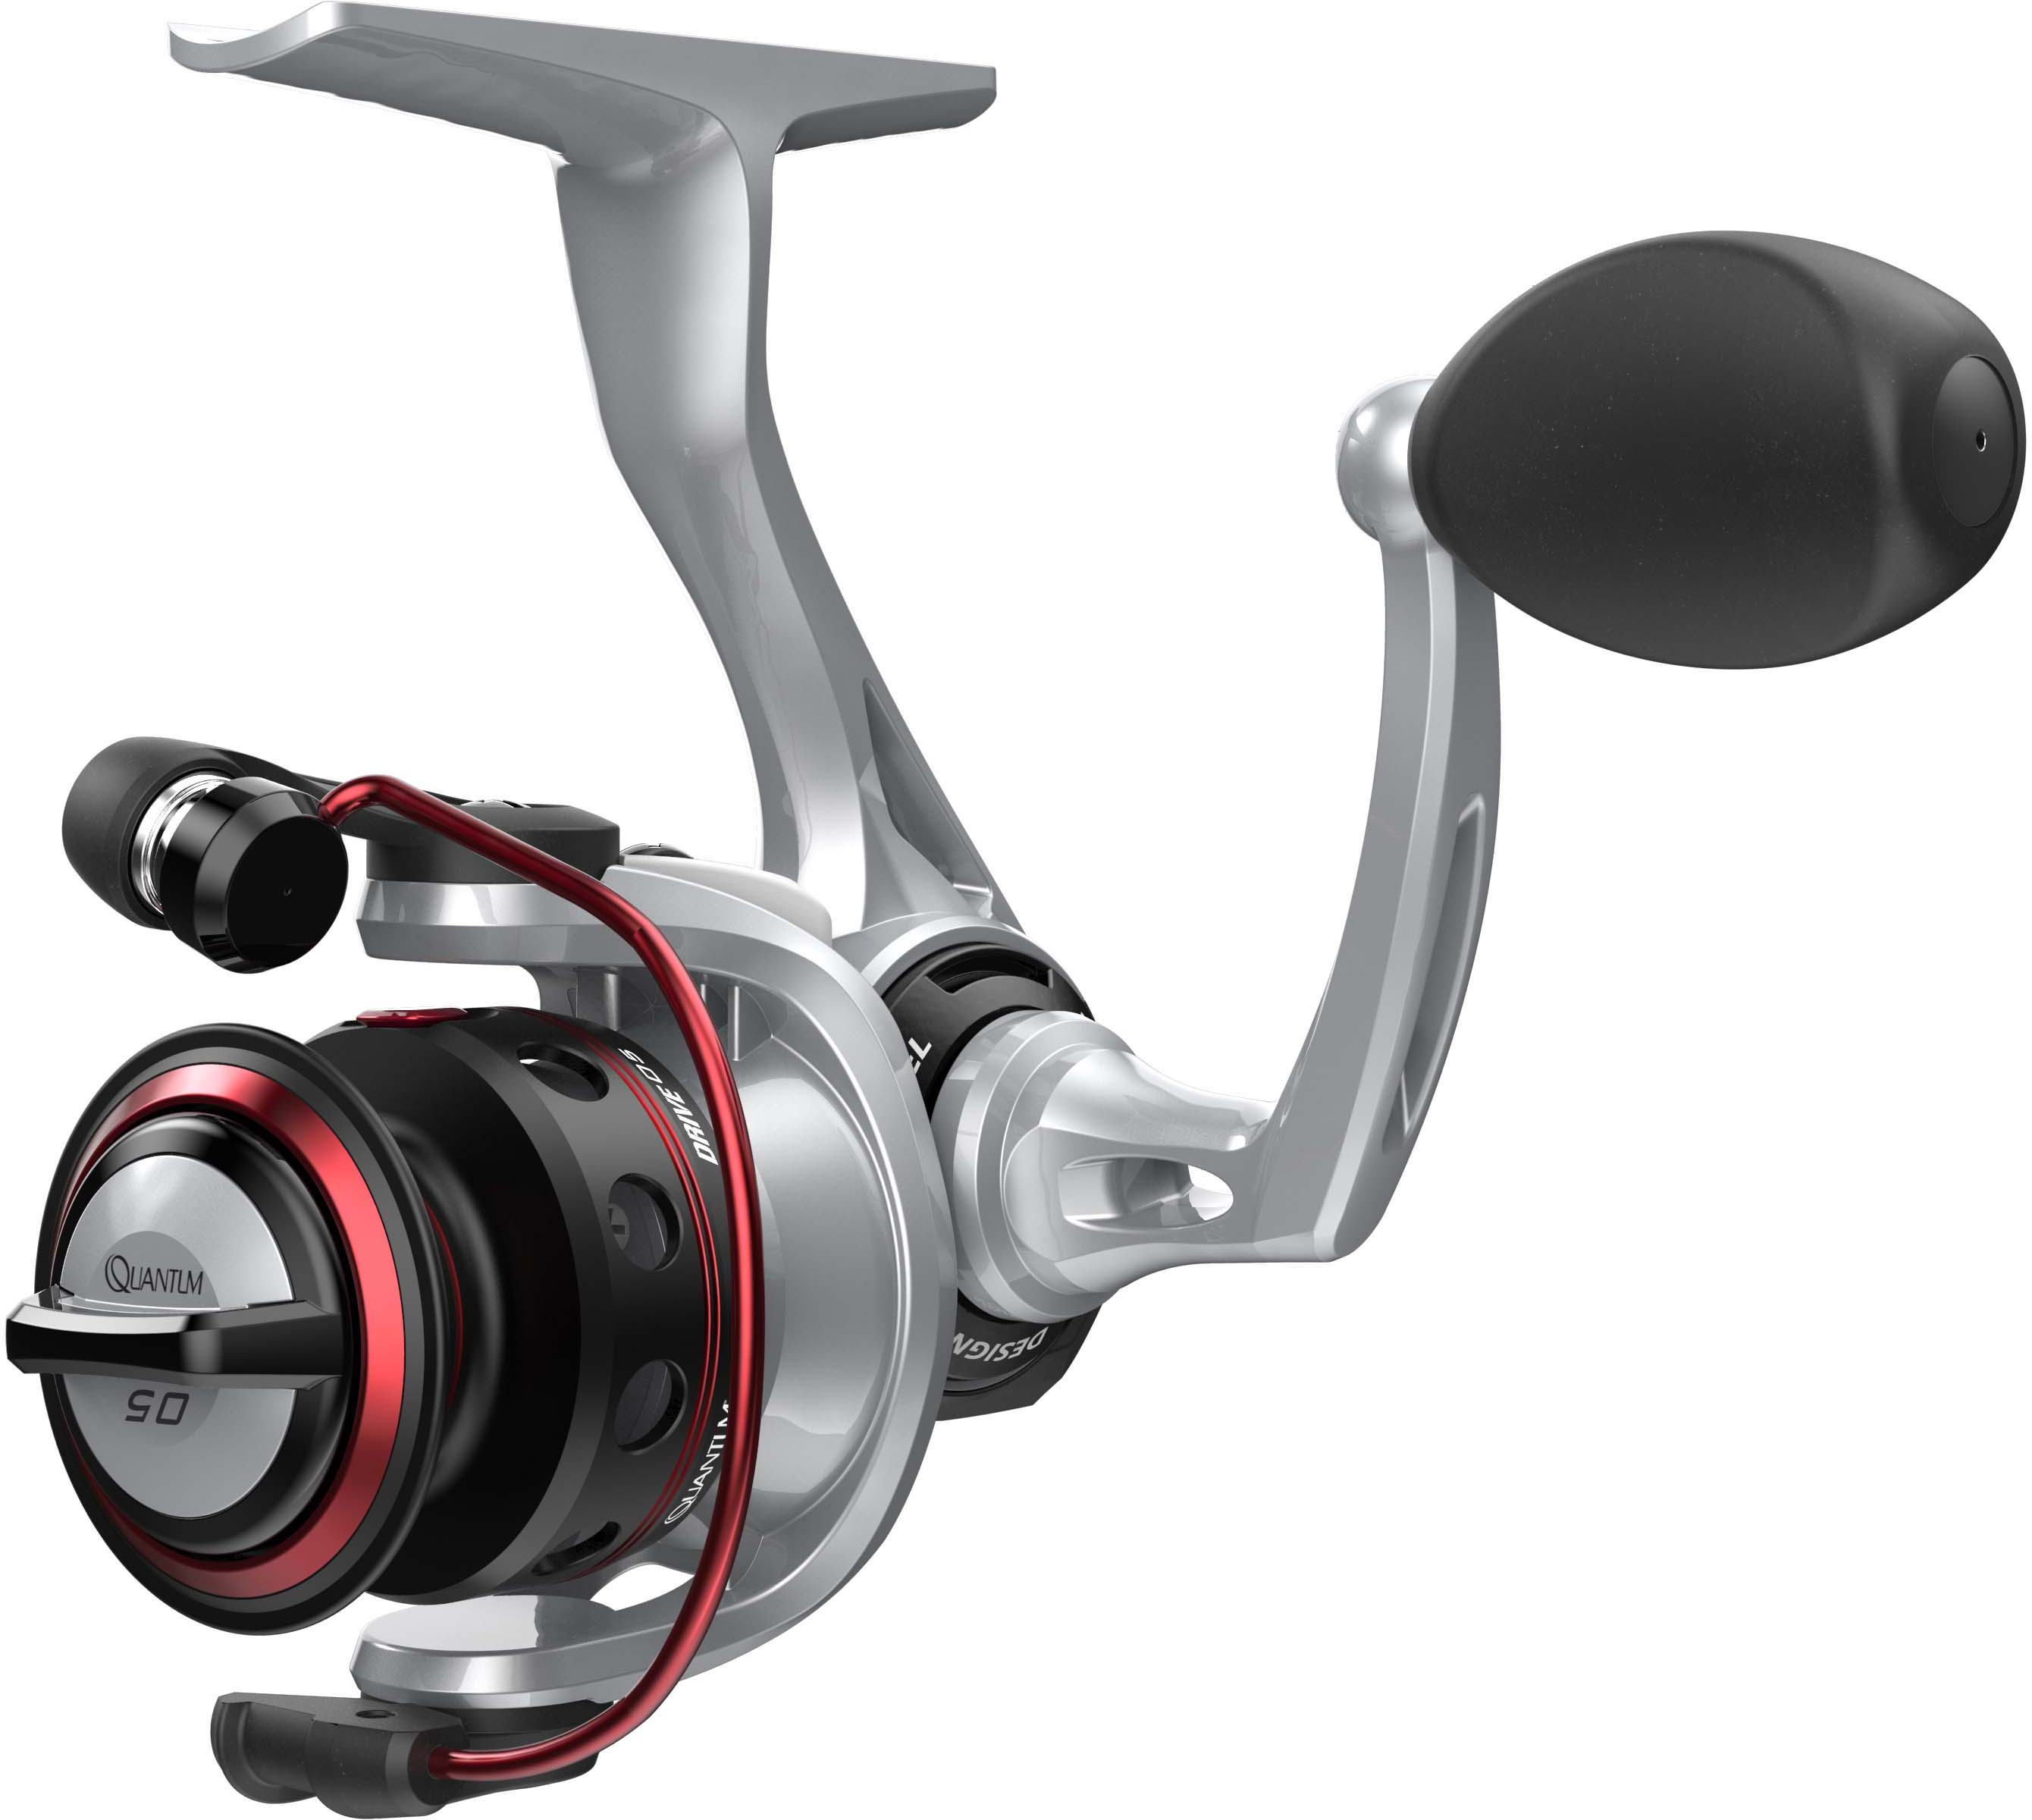 Quantum Throttle Spinning Fishing Reel, Size 30 Reel, Silver 